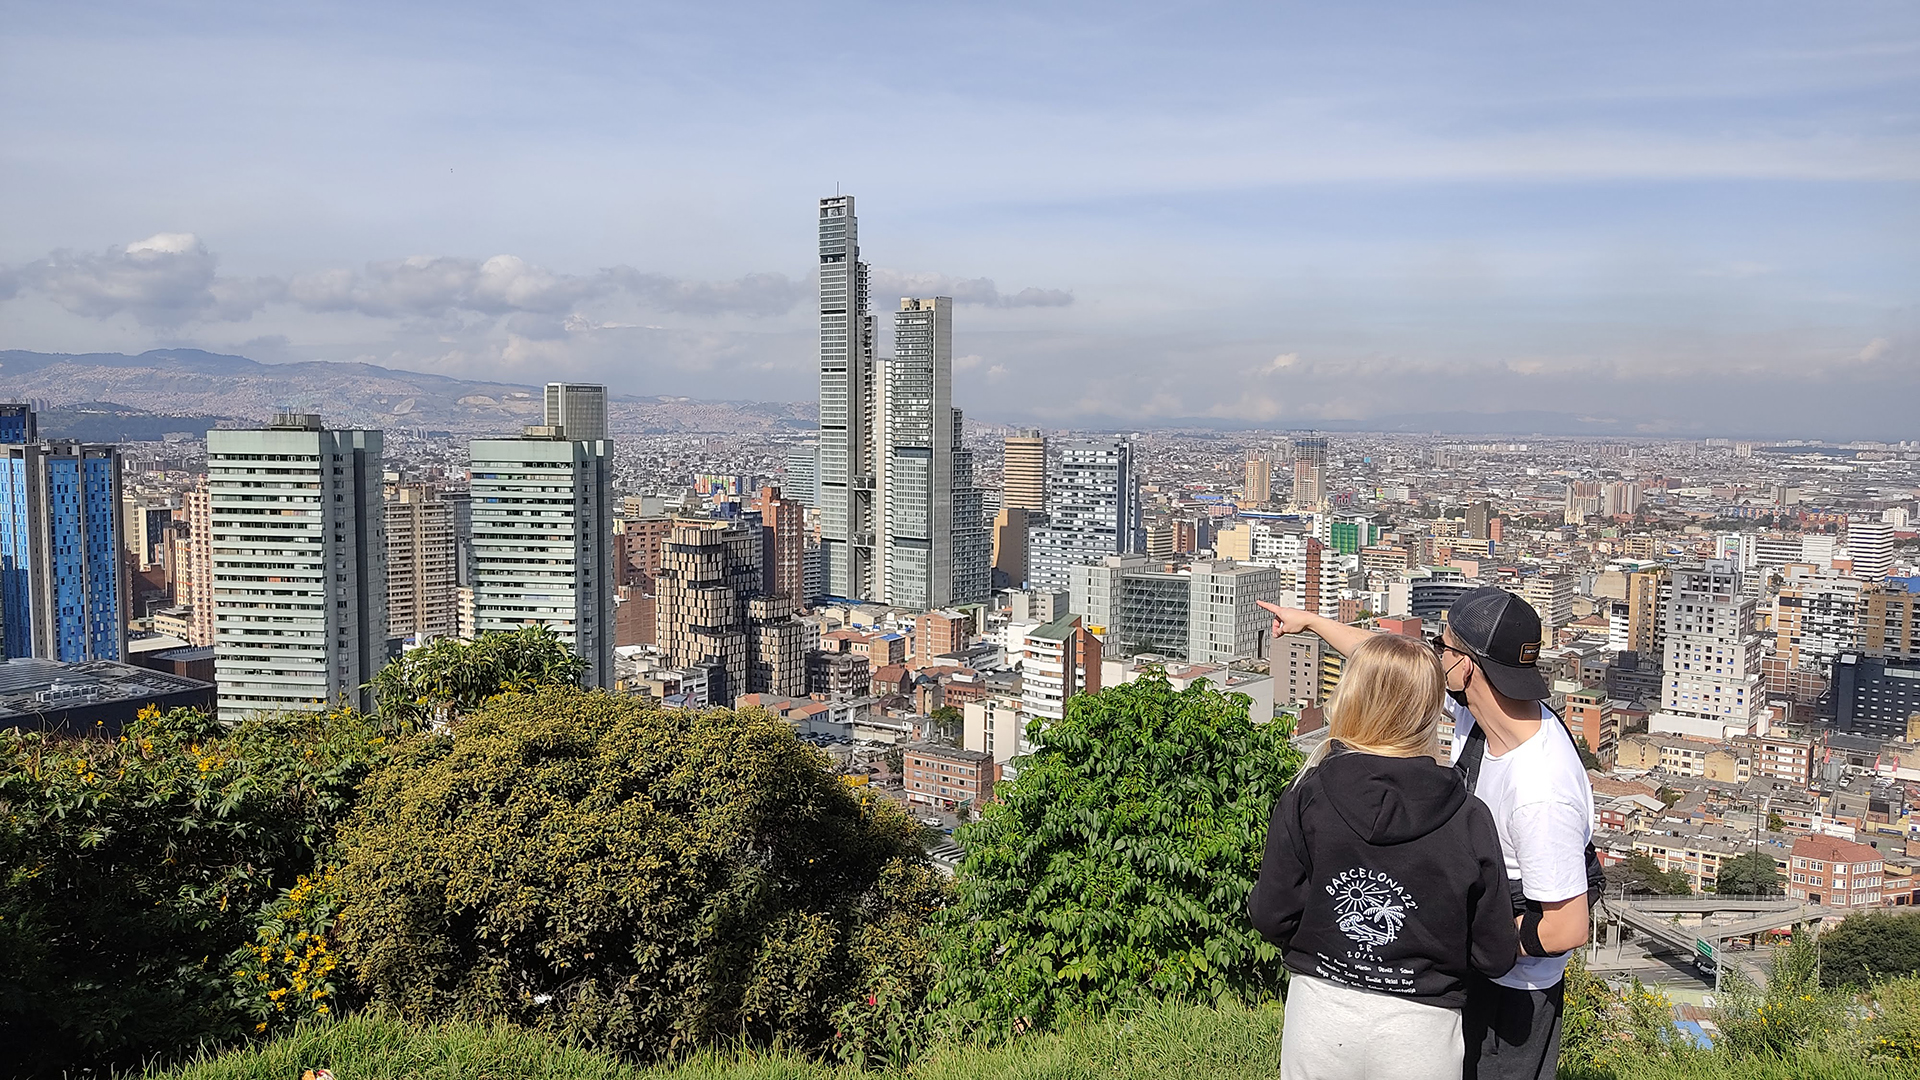 A couple stands on a grassy hill overlooking Bogotá's cityscape filled with modern high-rise buildings. One person is pointing towards the skyline, suggesting one of the many tours in Bogotá as a must-do activity.